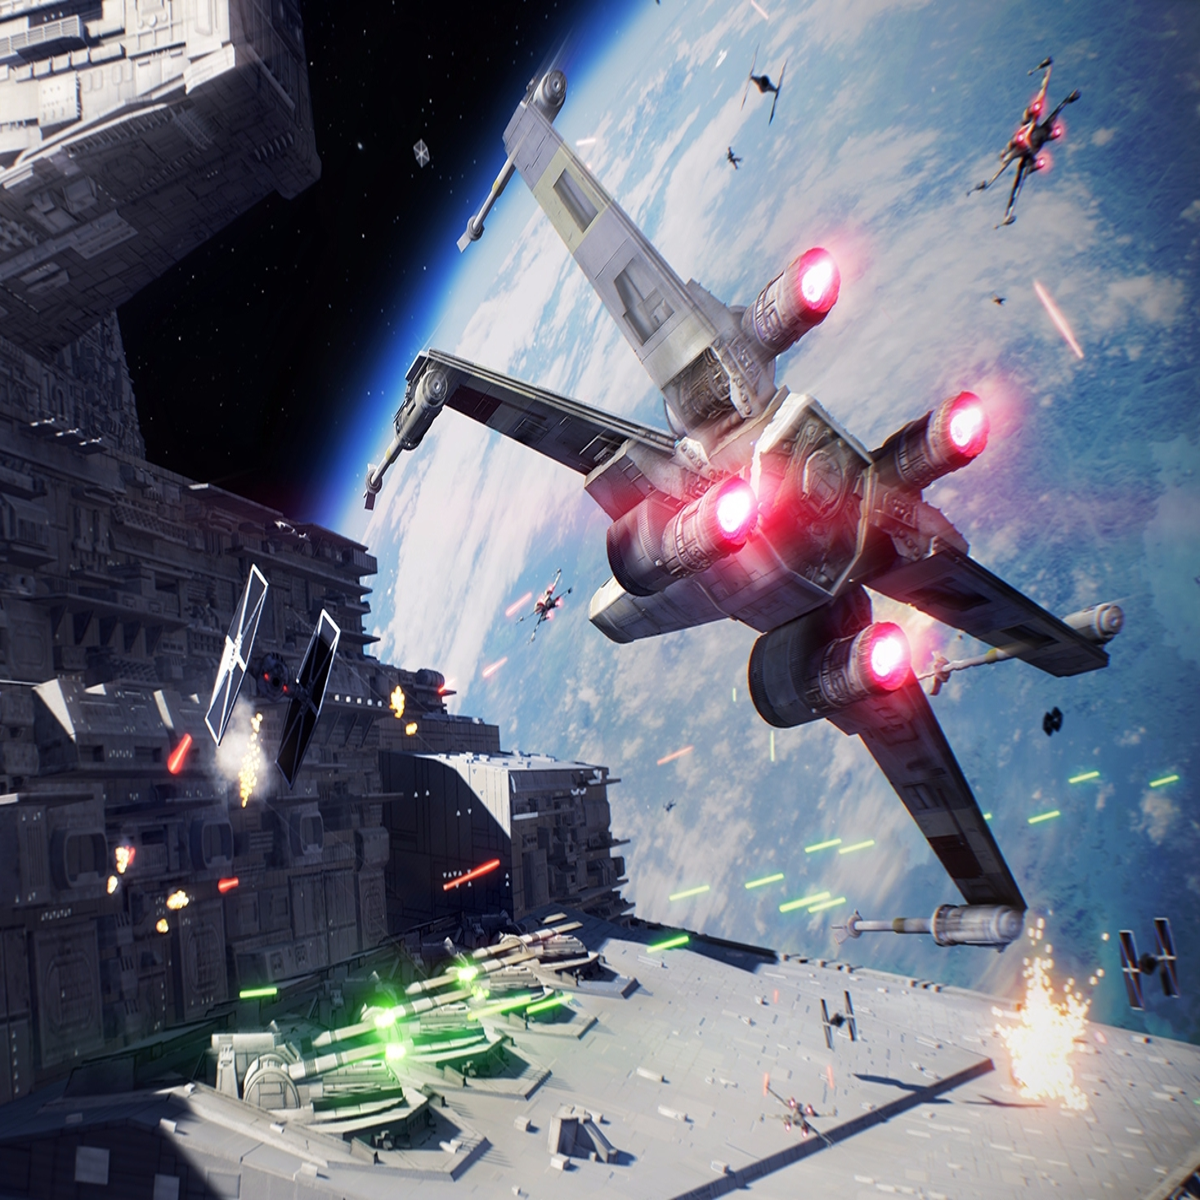 Star Wars Battlefront 2 beta hits in October with ground and space